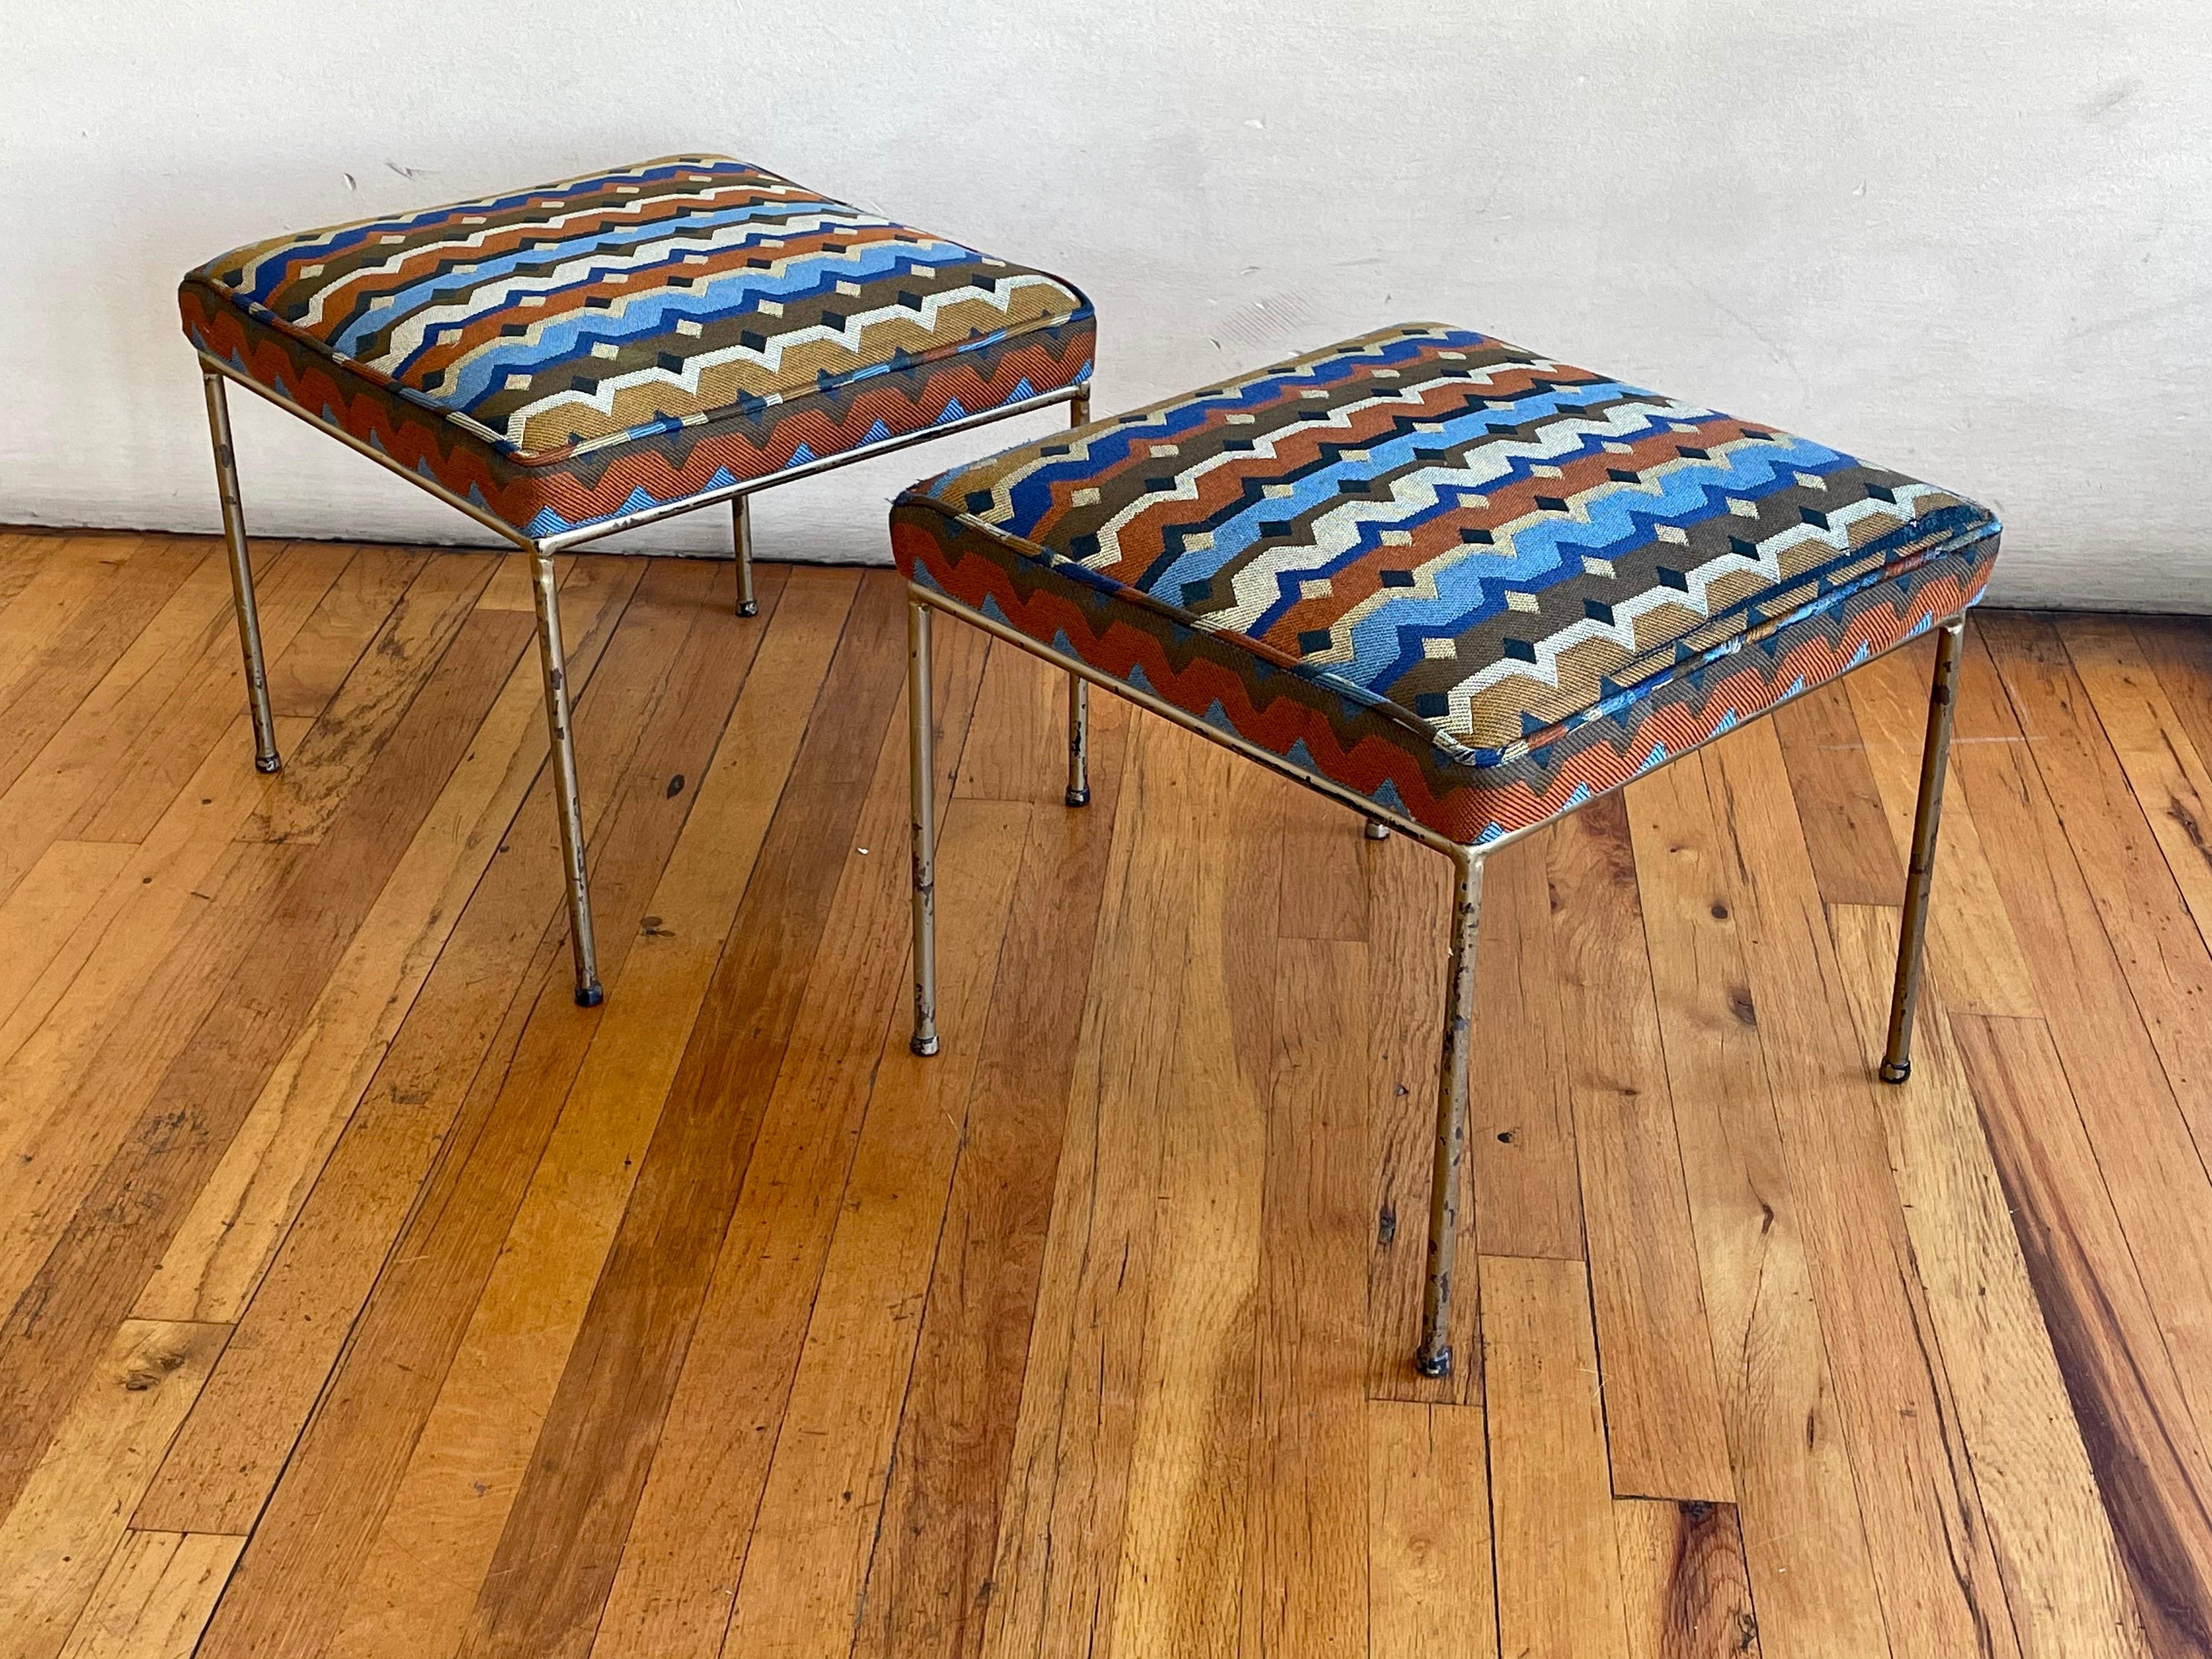 Pair of wrought iron stools, designed in the 1950s by Paul McCobb and manufactured by Winchendon Furniture (Planner Group), great fabric Missioni style the bases have been repainted in gold some chips to the paint and small tear on the pipping of